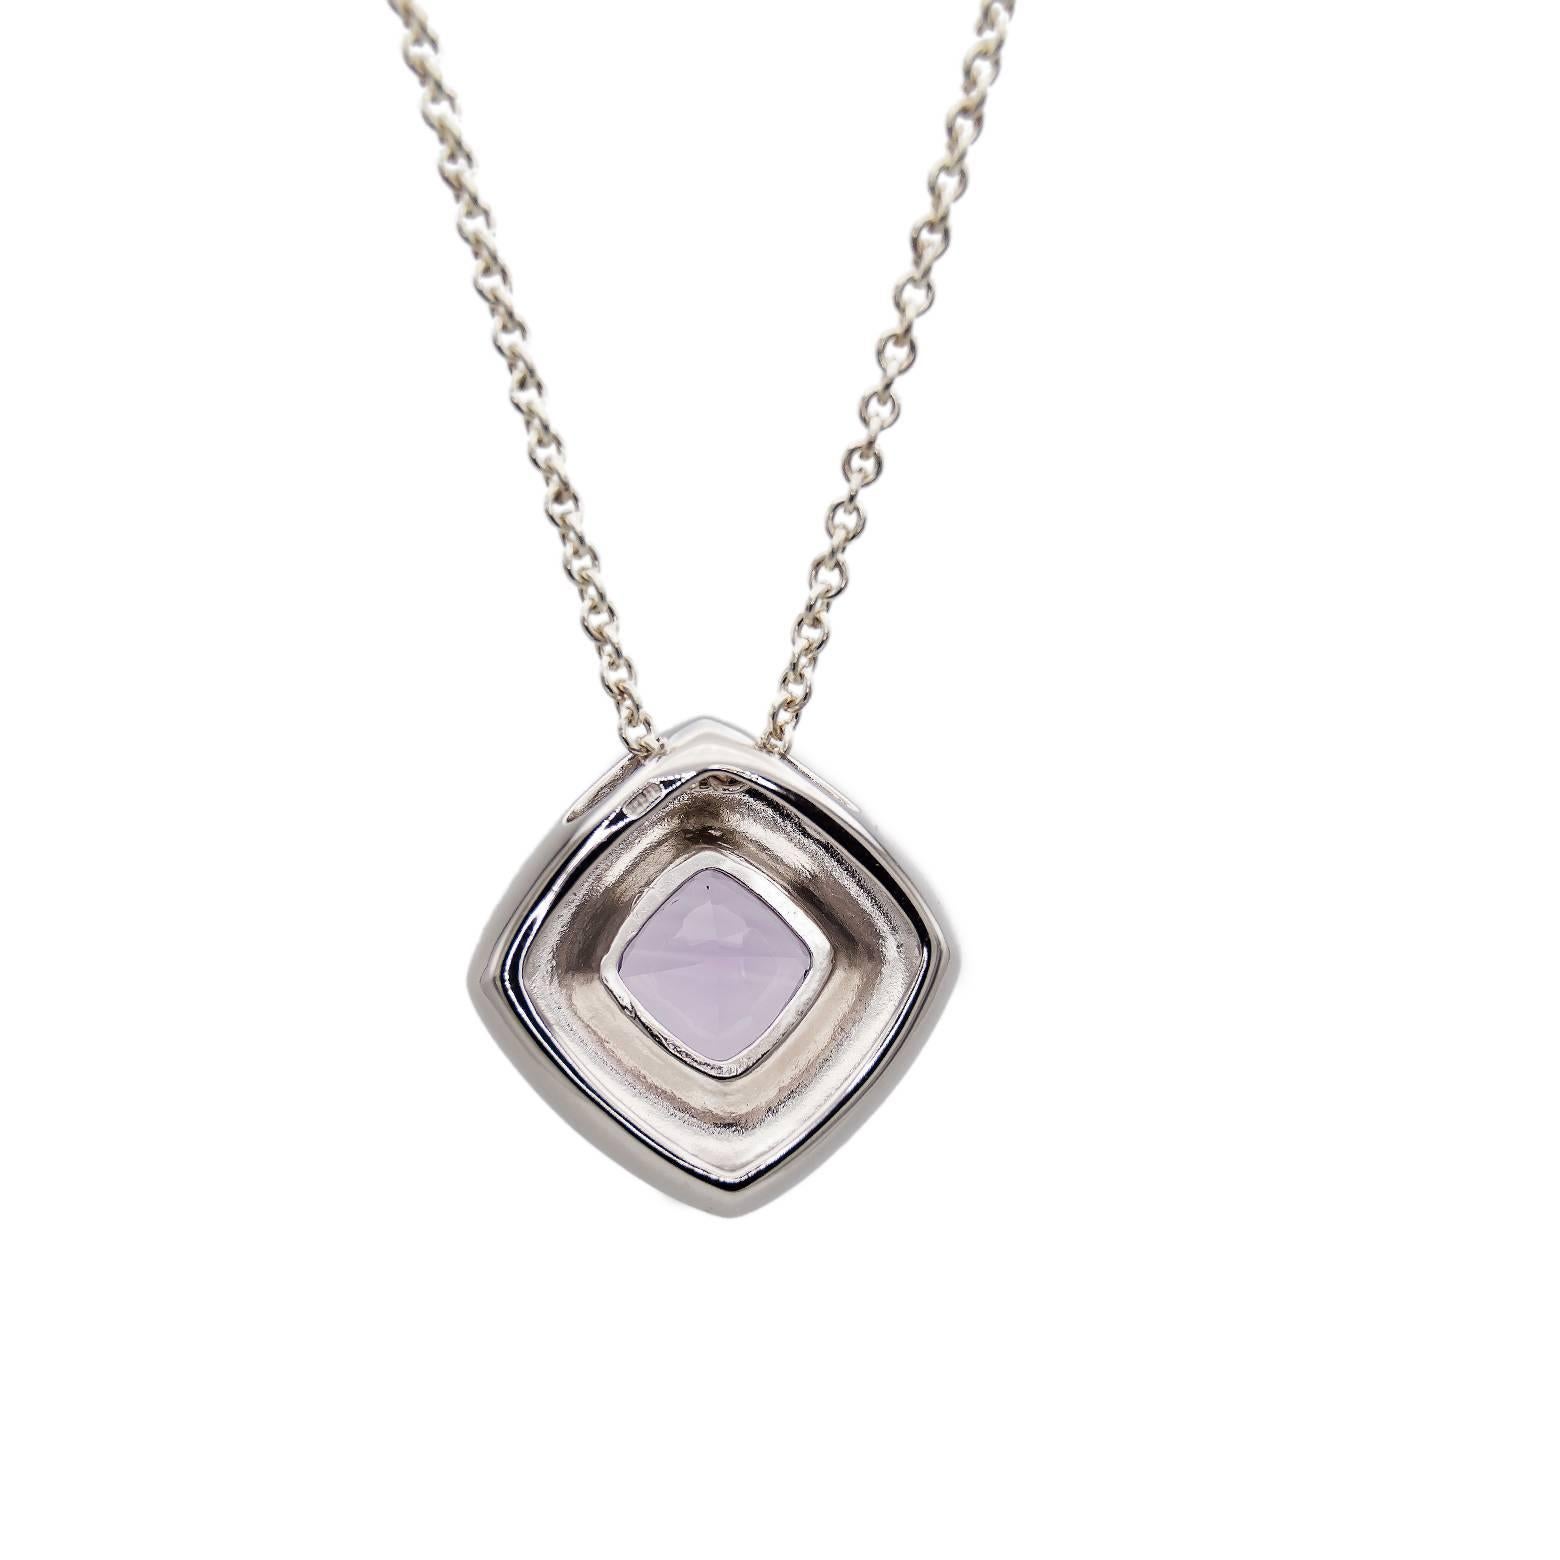 Stunning and elegant this bright purple rose-cut amethyst pendant sings with a voice of clarity. A smooth design and symmetrical in every way this piece can easily be worn everyday. Chain sold separately. We have matching earrings if you are